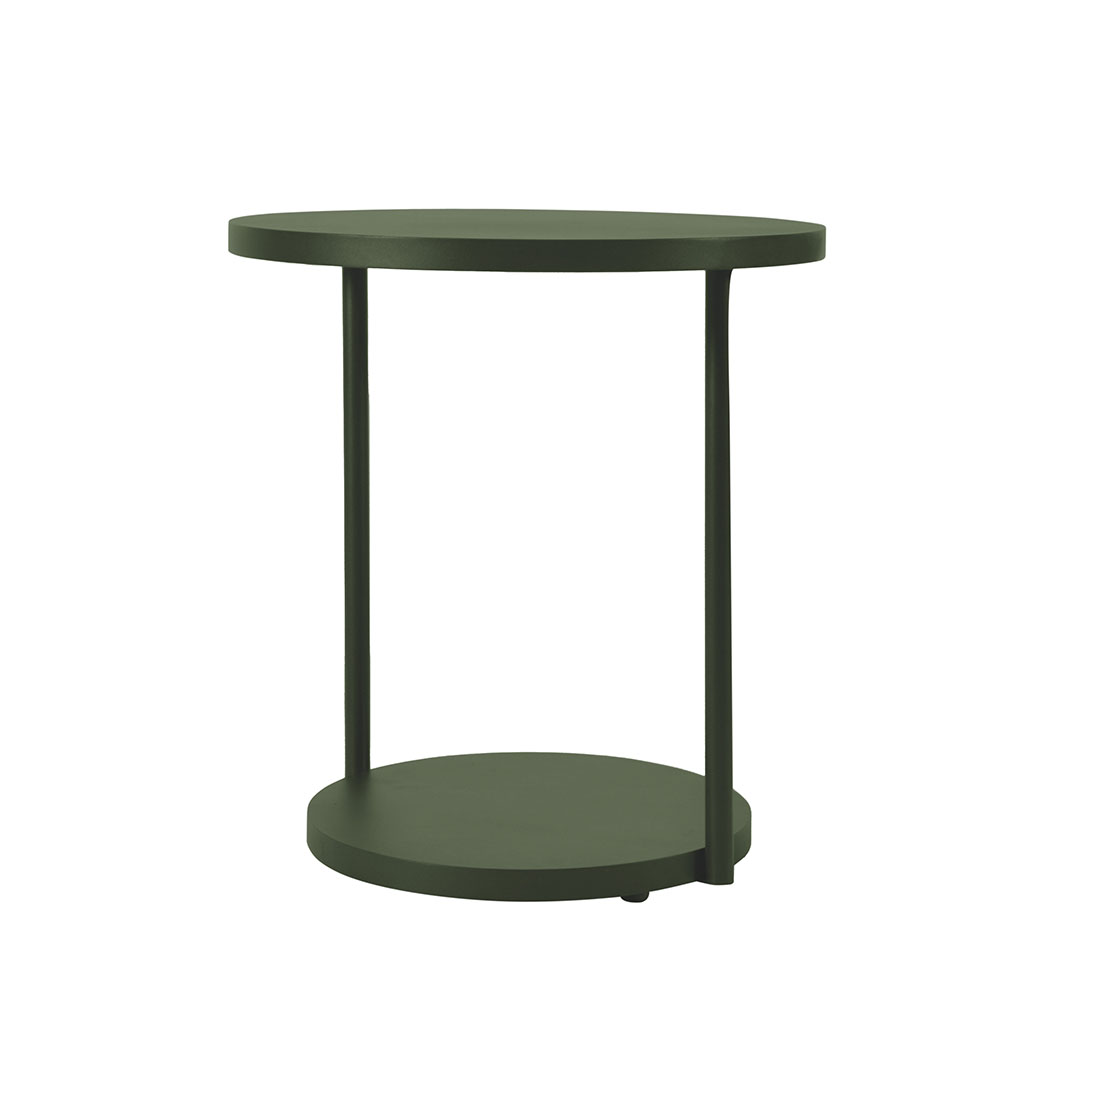 Pier Pipe Round 2 Seater Dining Table image 8